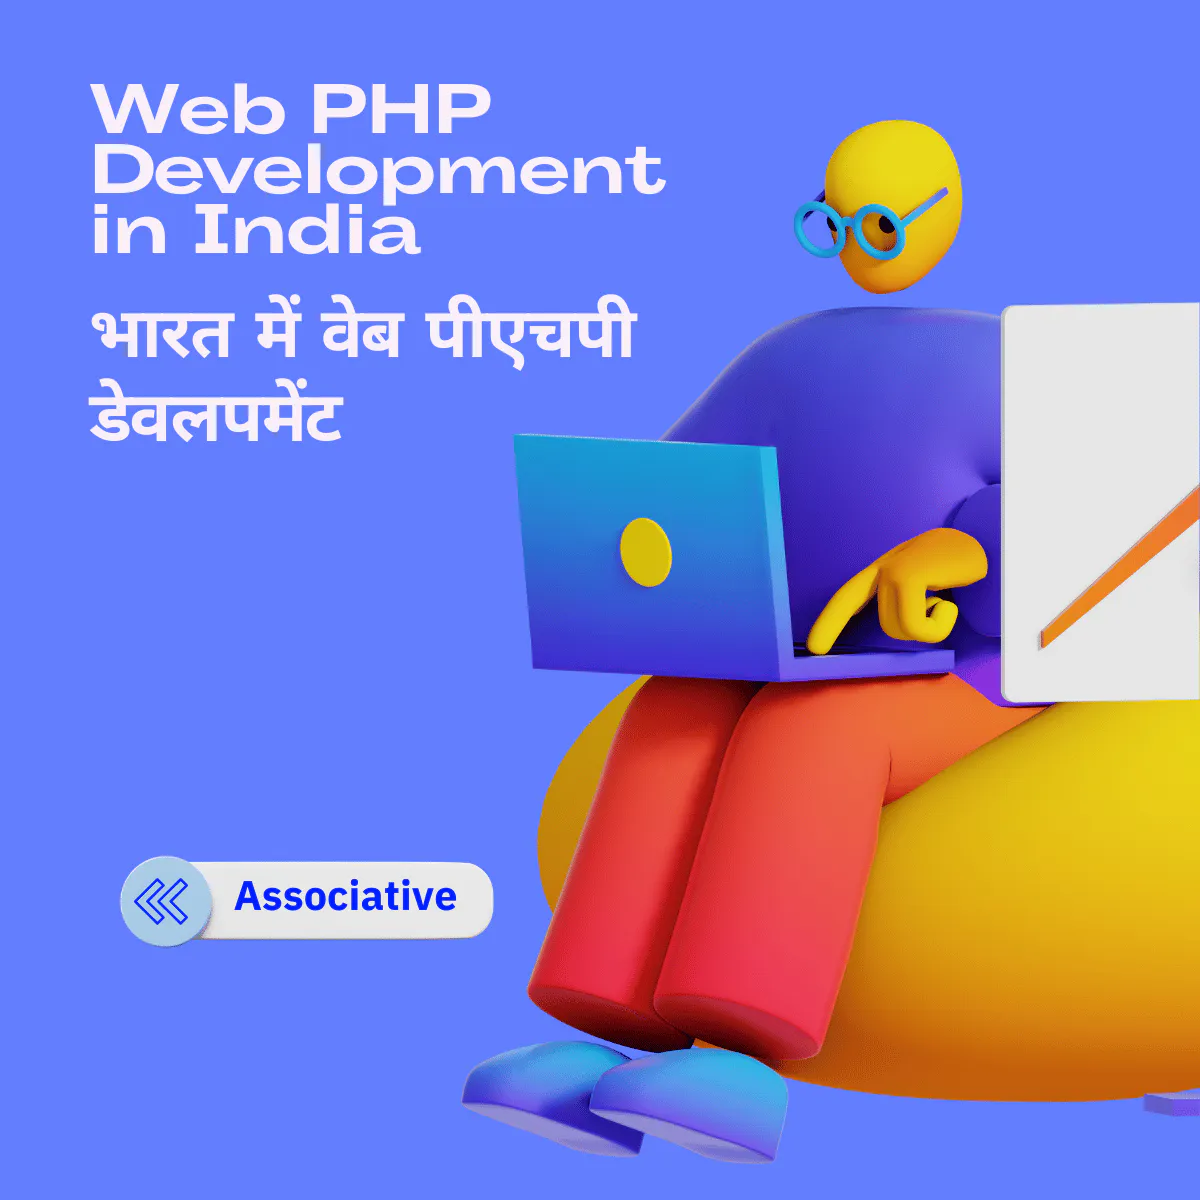 Web PHP Development in India